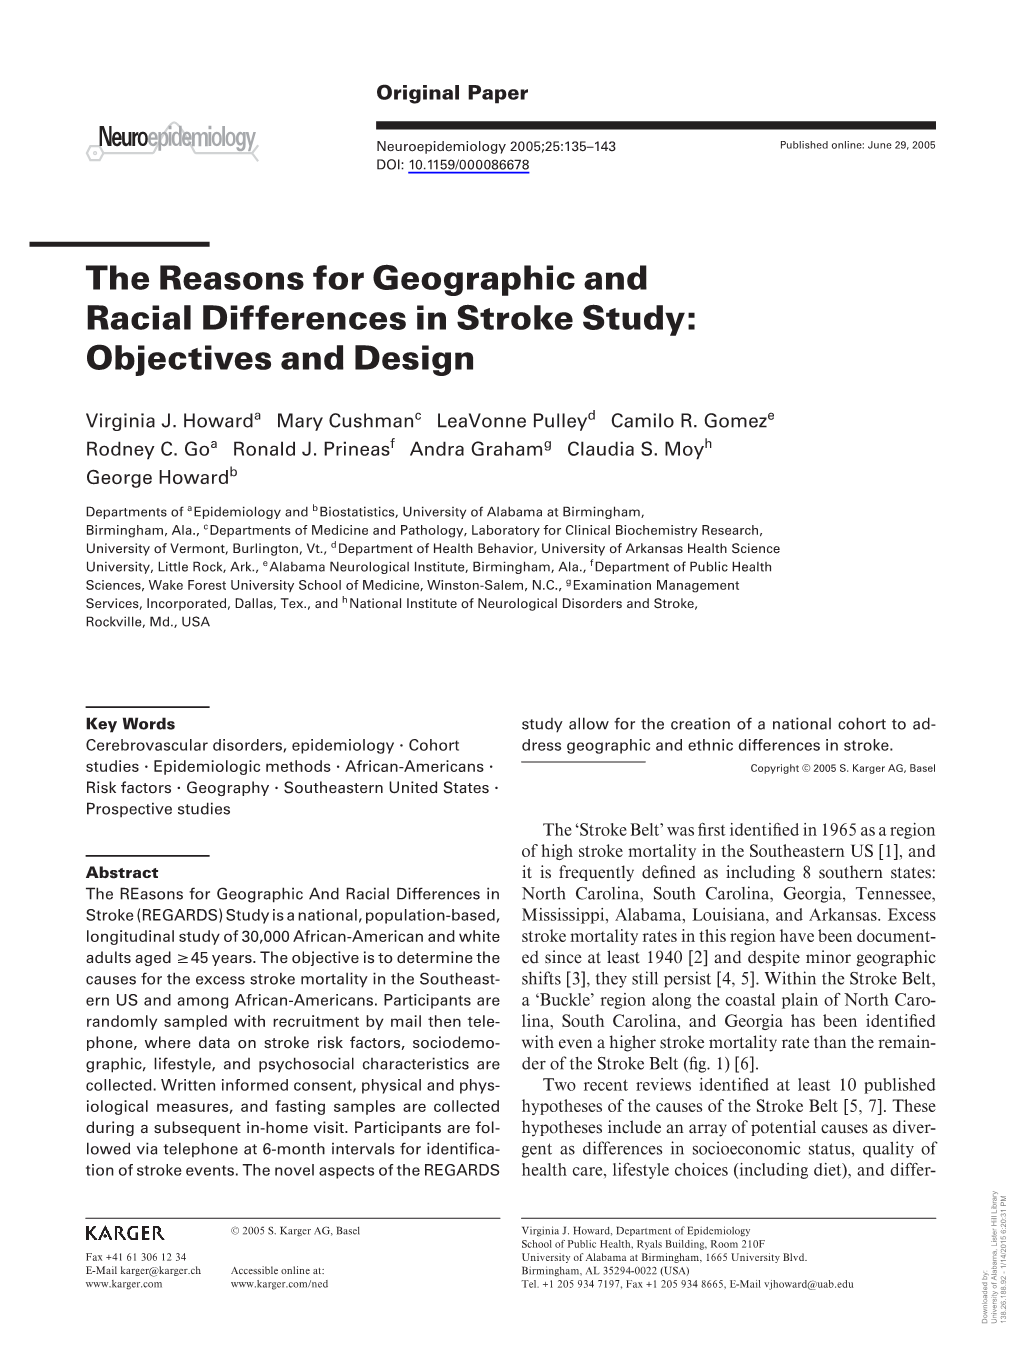 The Reasons for Geographic and Racial Differences in Stroke Study: Objectives and Design